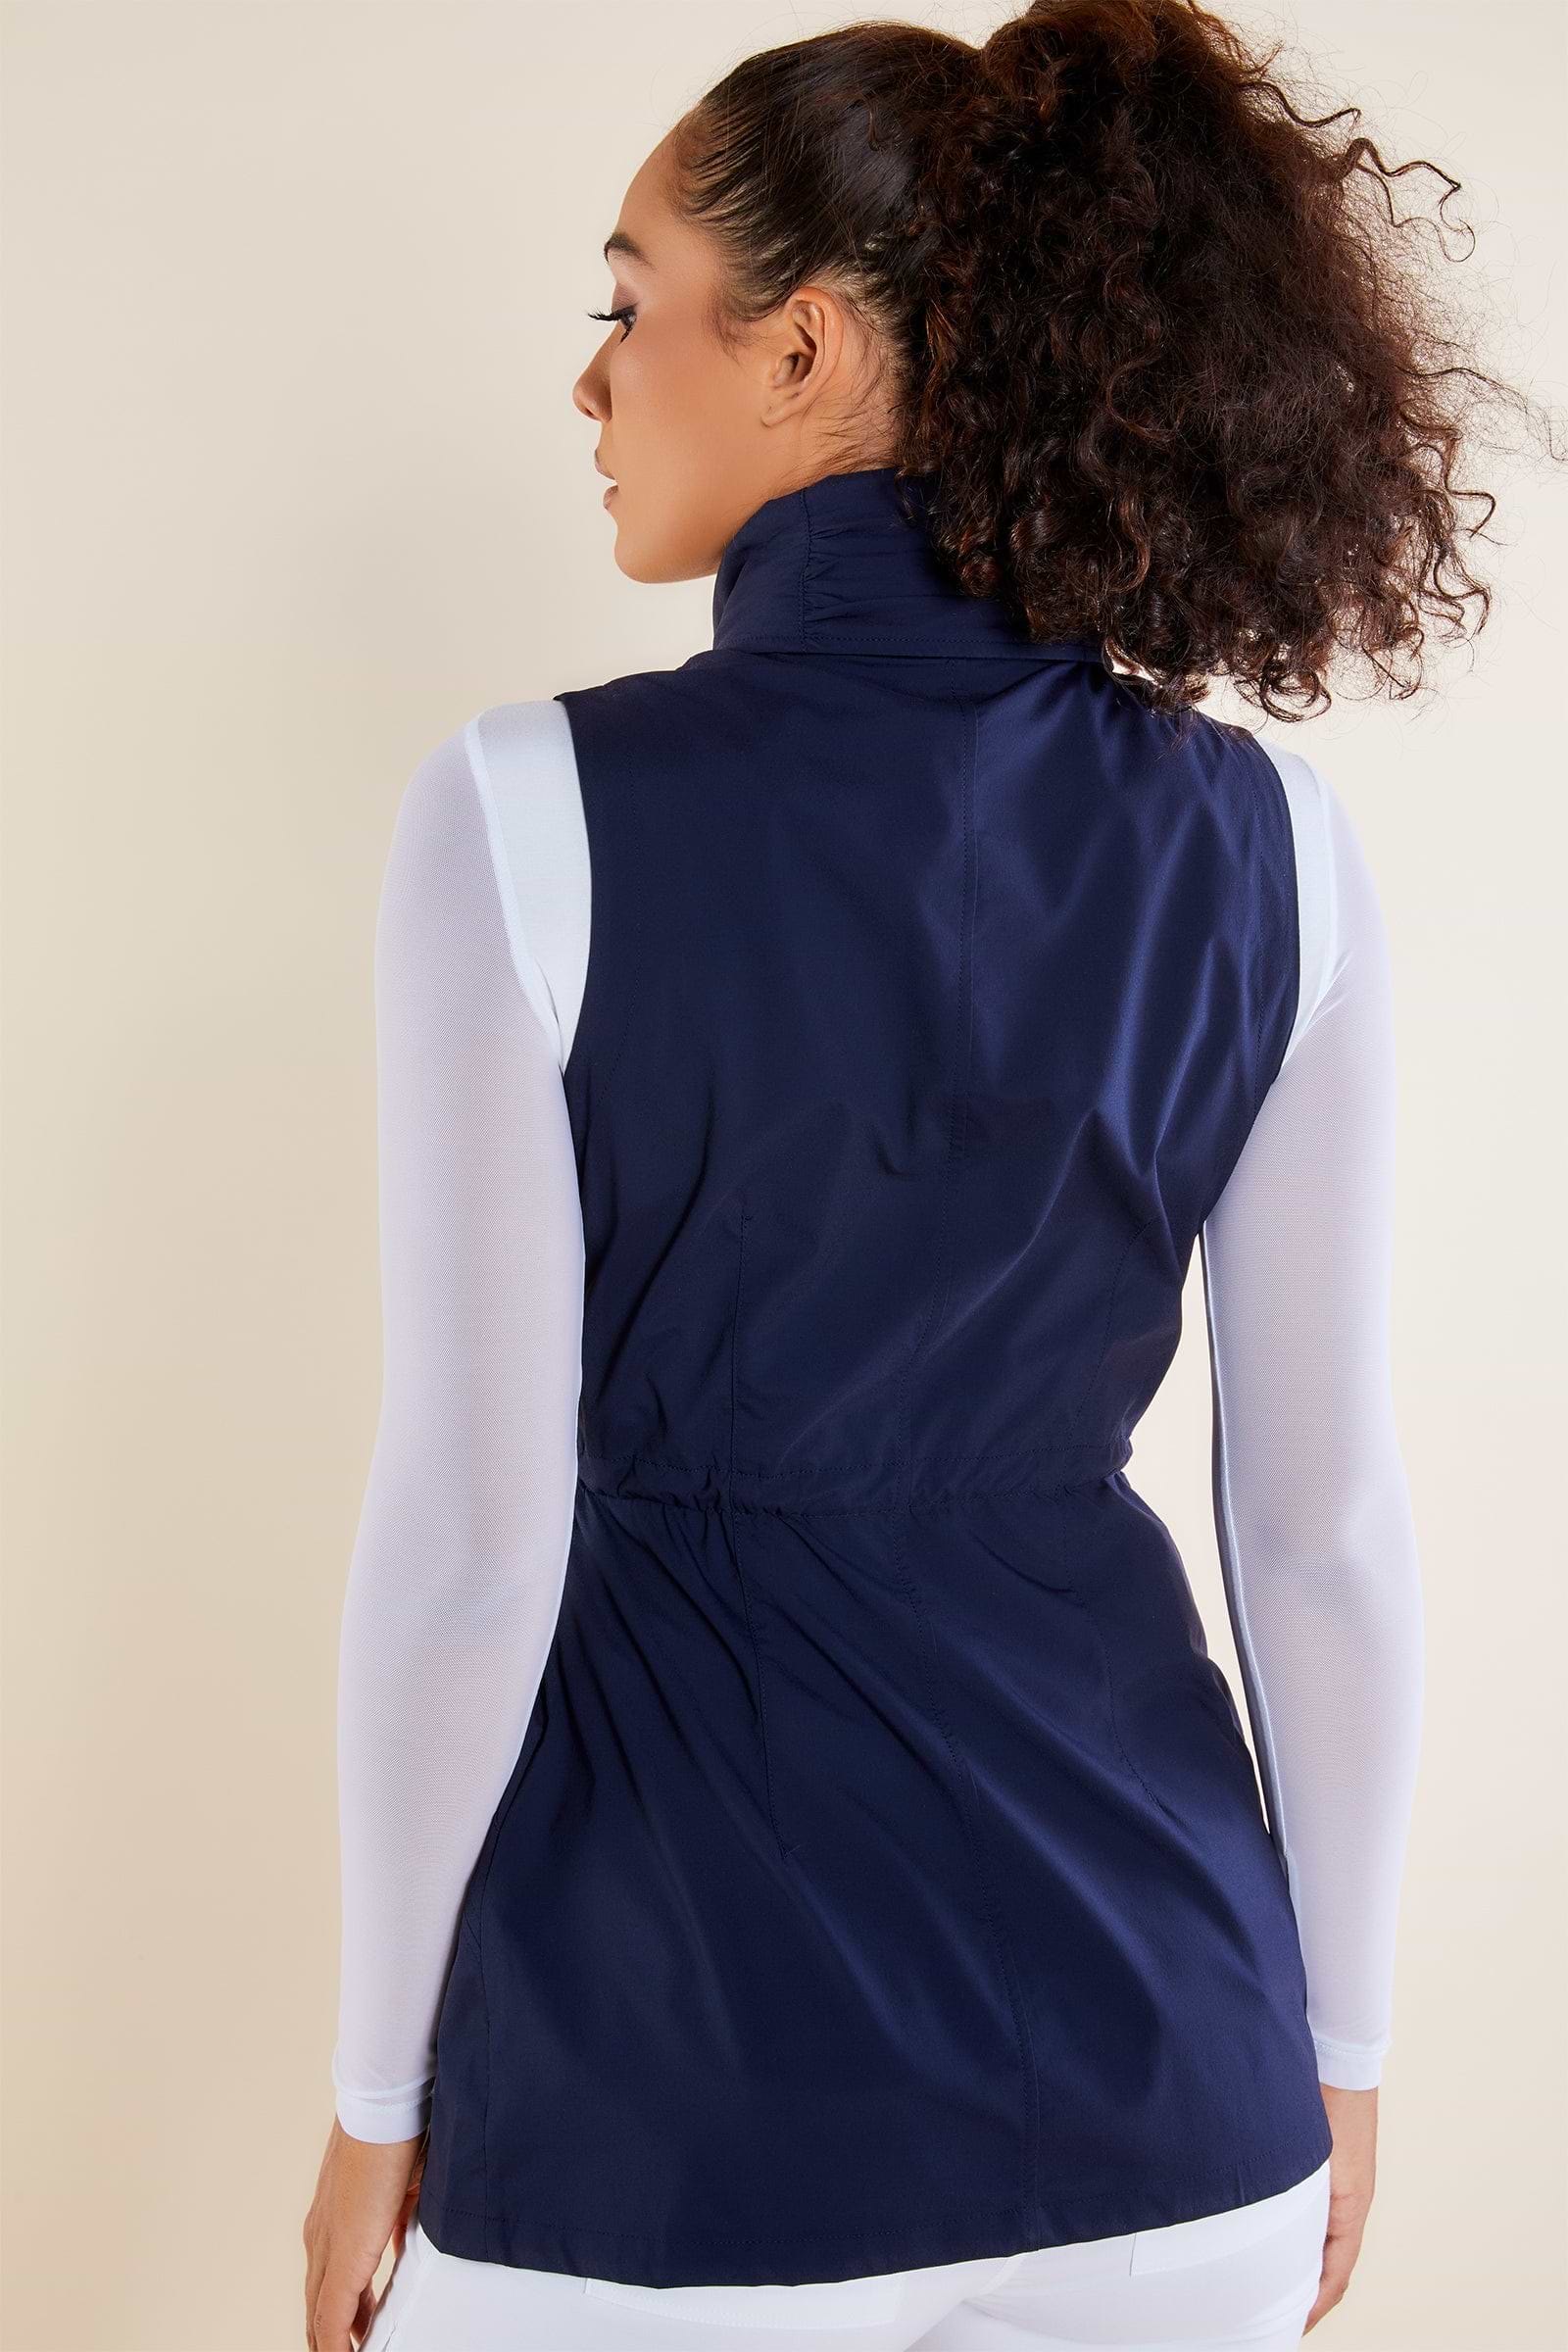 The Best Travel Vest. Woman Showing the Back Profile of a Delaney Travel Vest in Navy